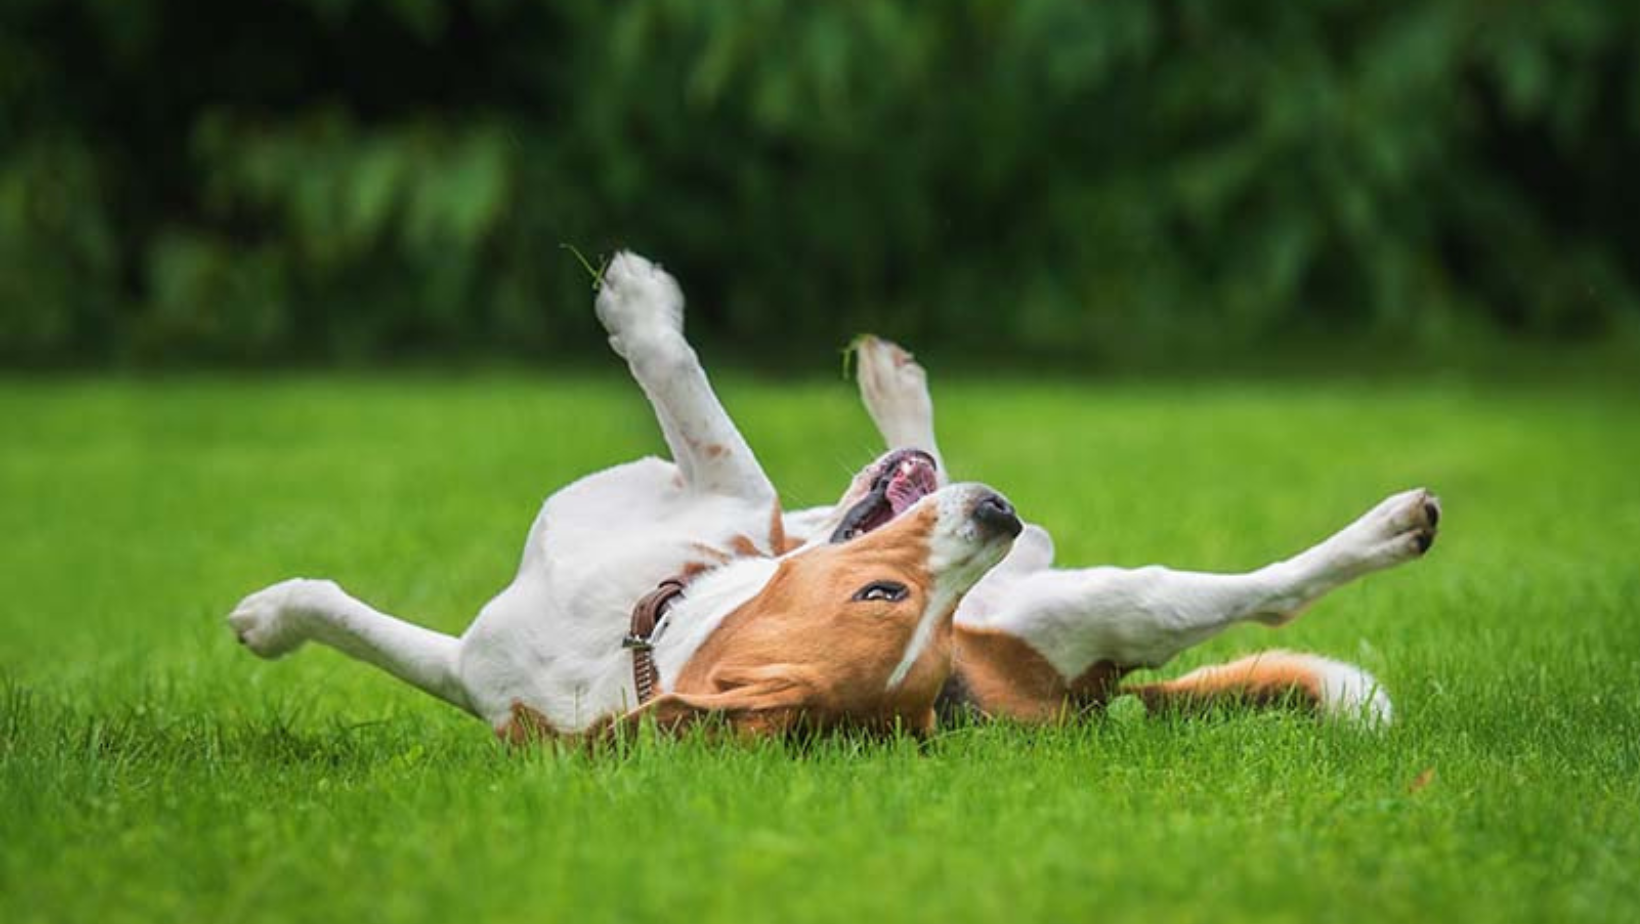 Why Do Dogs Roll in Poop?